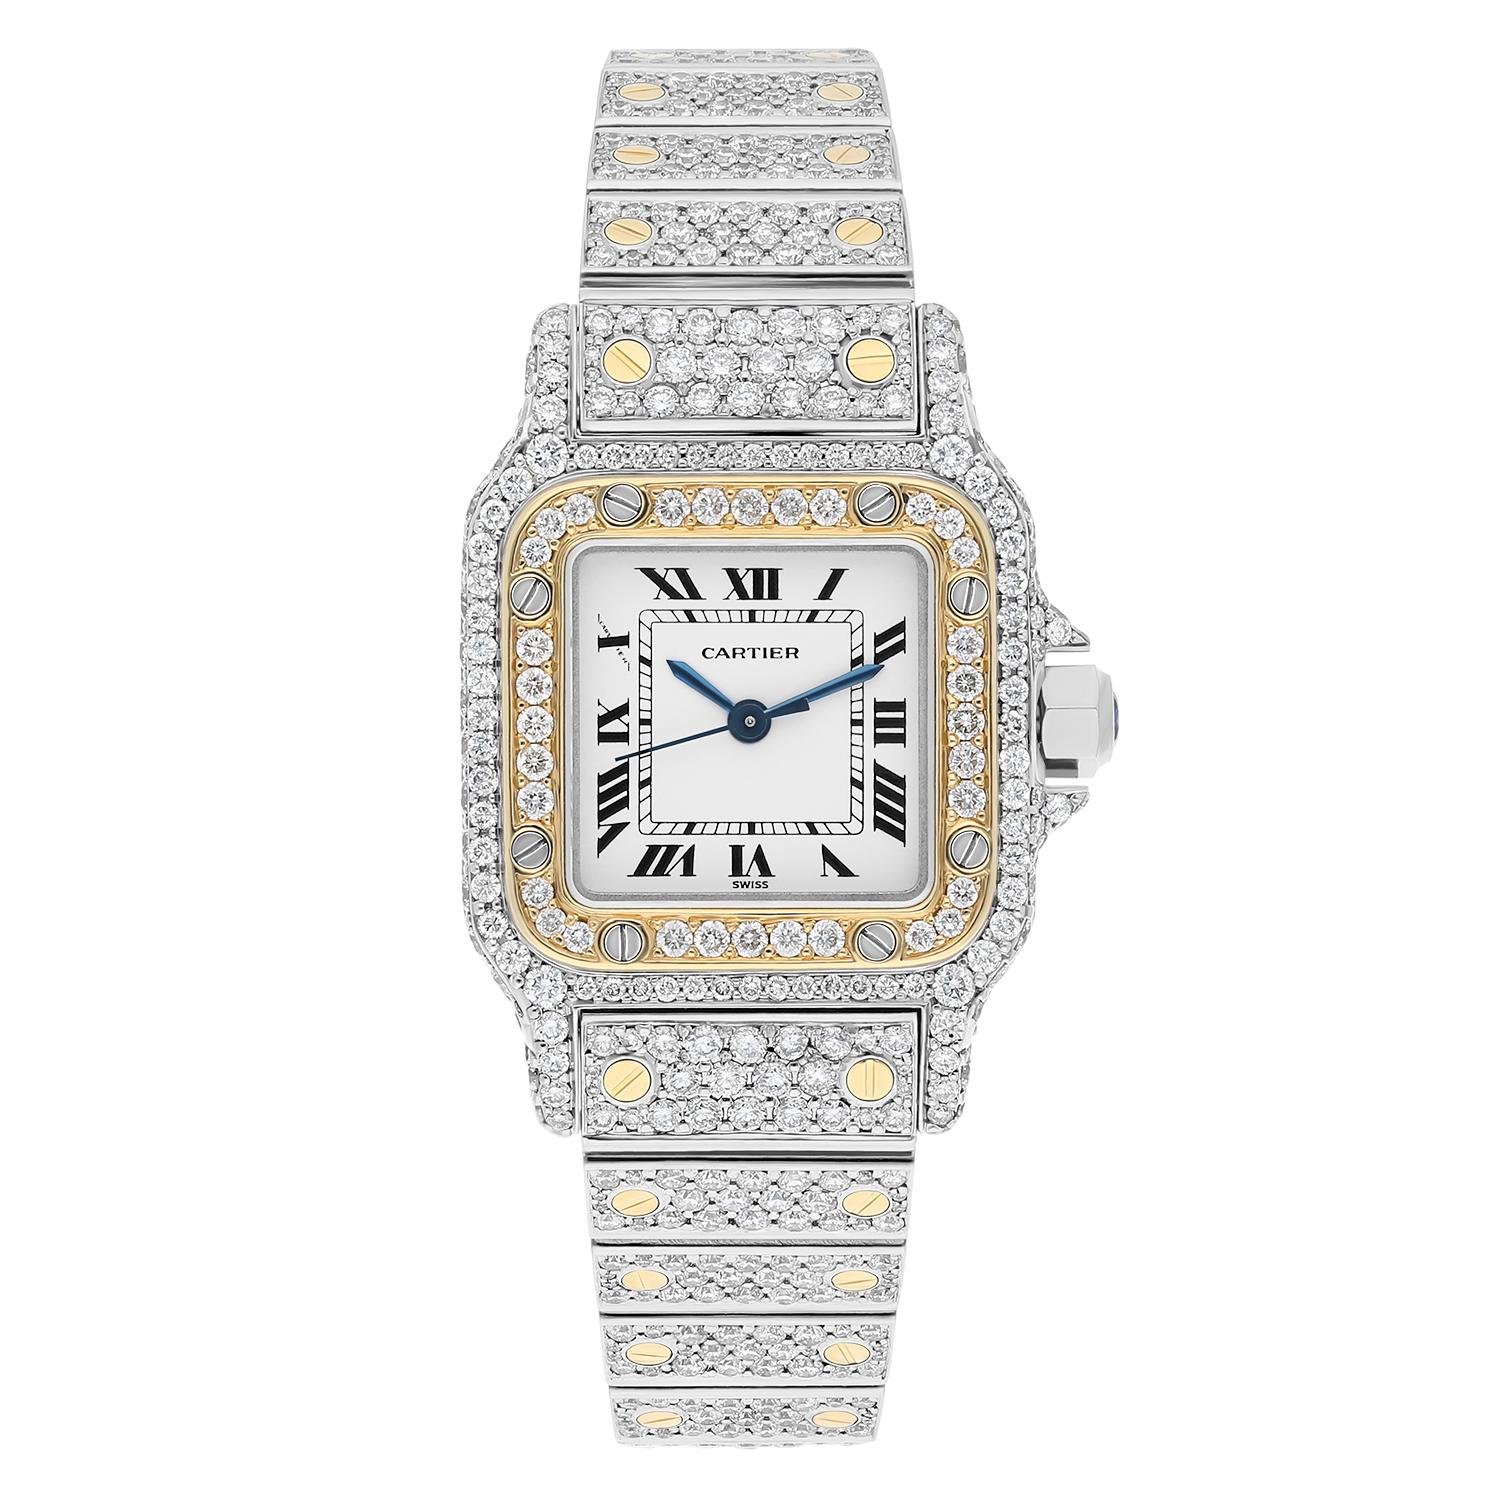 Brand: Cartier
Series: Santos 
Case Diameter: 24 mm
Bracelet: 18k yellow gold & stainless steel
Bezel: Custom diamond set
Dial: Off-white Dial
The sale includes a Cartier watch box and an appraisal certificate which states the watch's